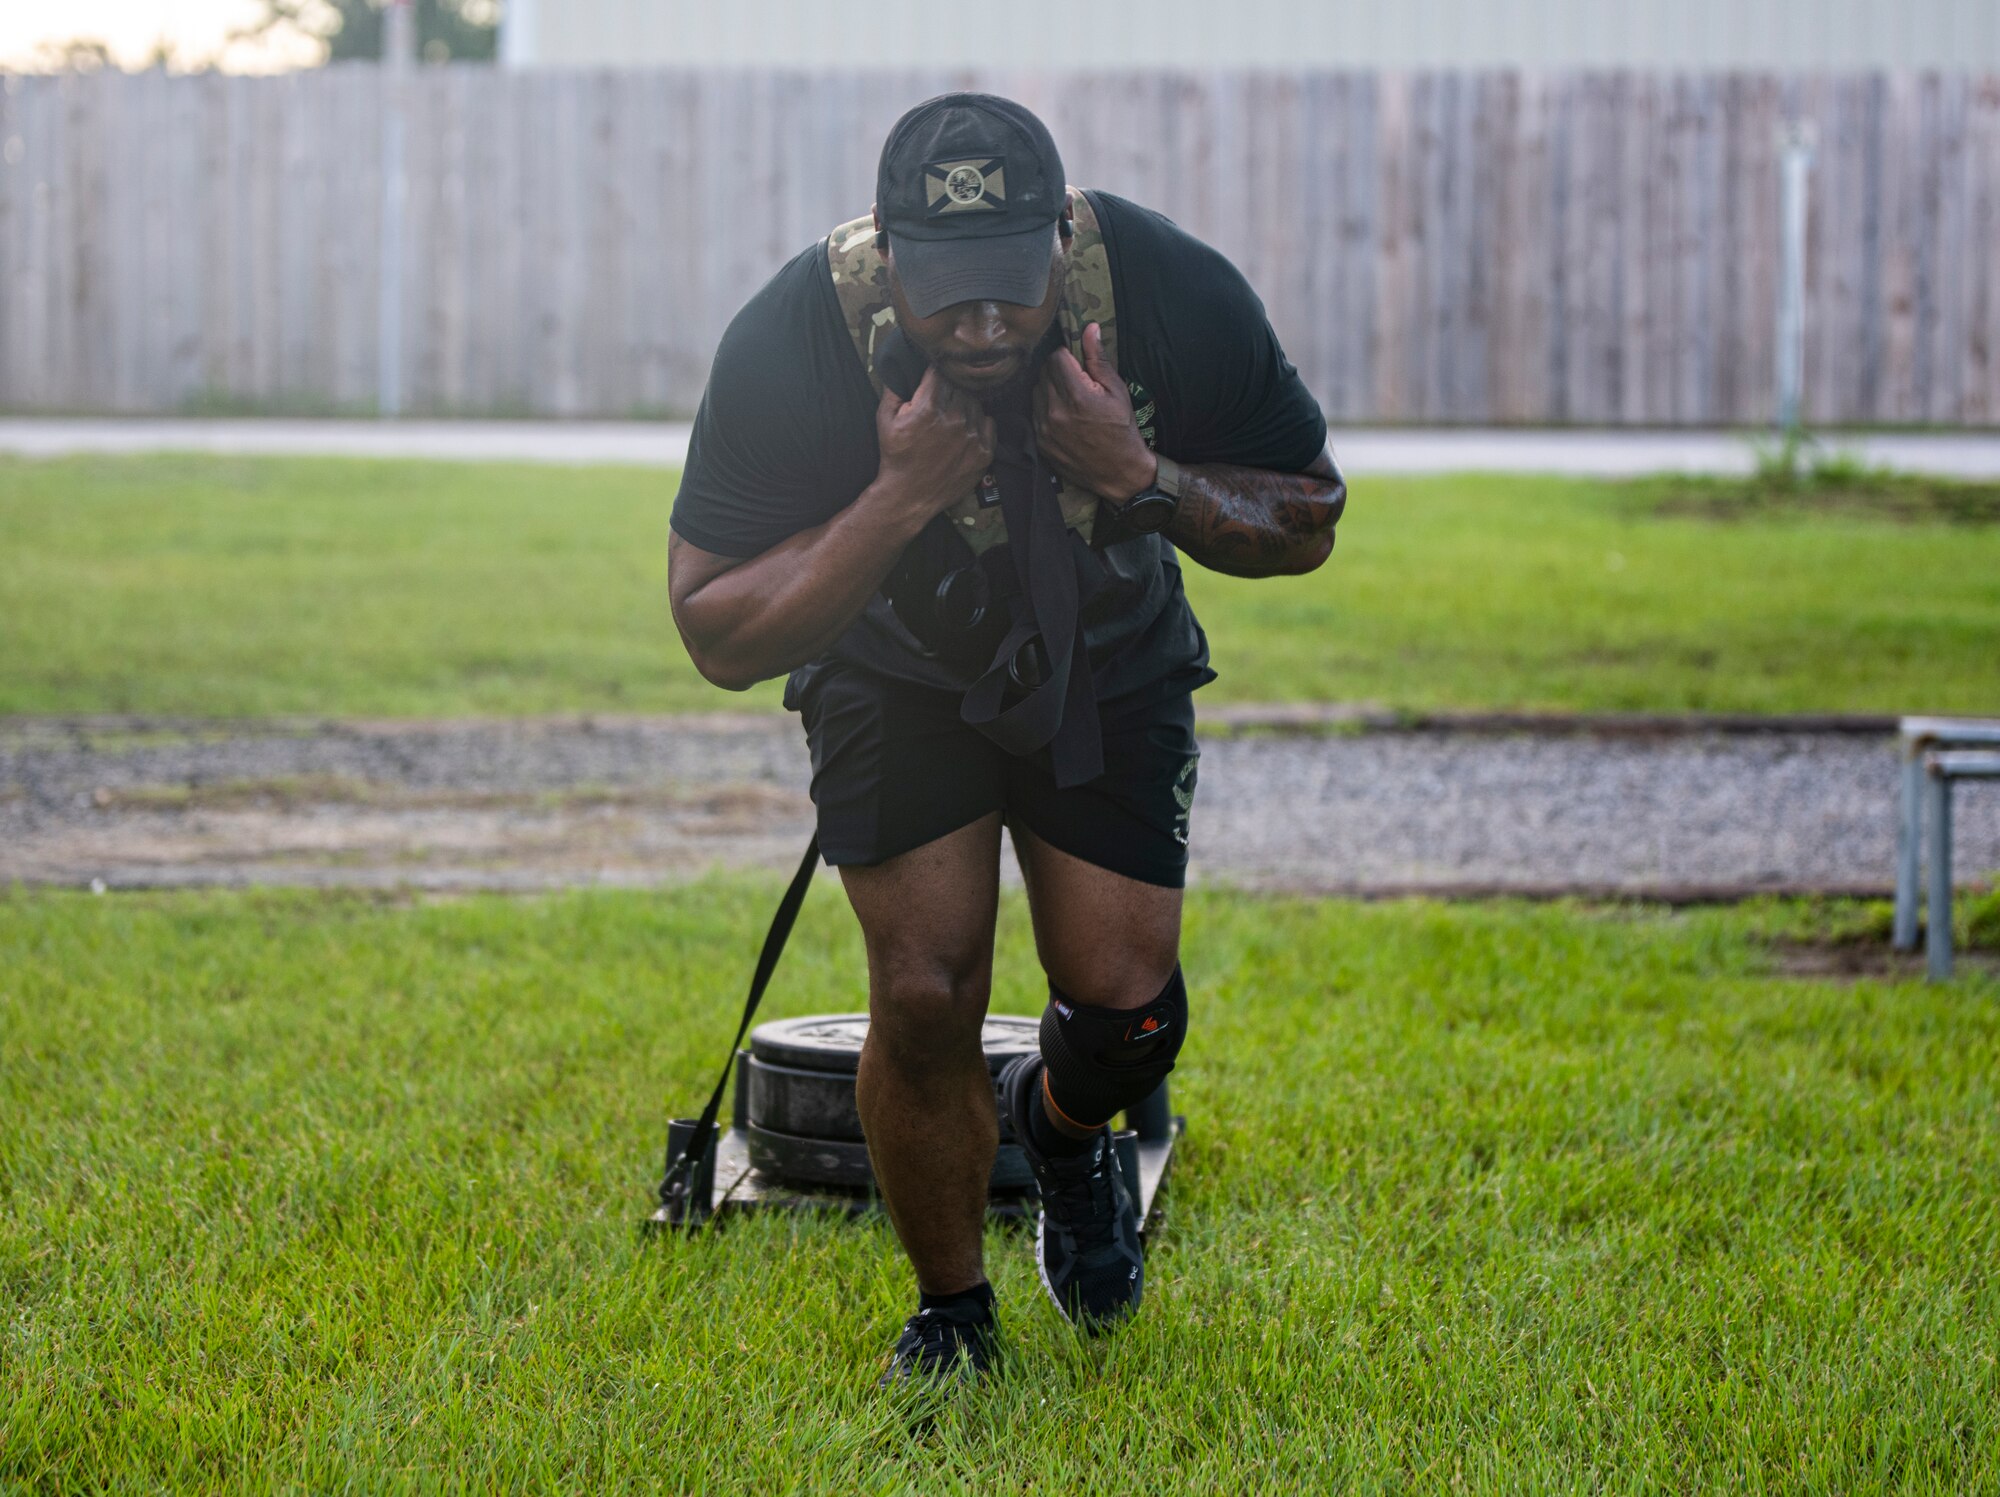 A Bay County Sheriff’s Office special weapons and tactics officer pulls a weighted sled during a workout at the Bay County Sheriff’s Office, Panama City, Florida, July 13, 2021. Local SWAT teams trained with 325th Security Forces Squadron members to learn and share strategies and techniques critical to performing their duties in high-stress situations. (U.S. Air Force photo by Staff Sgt. Stefan Alvarez)